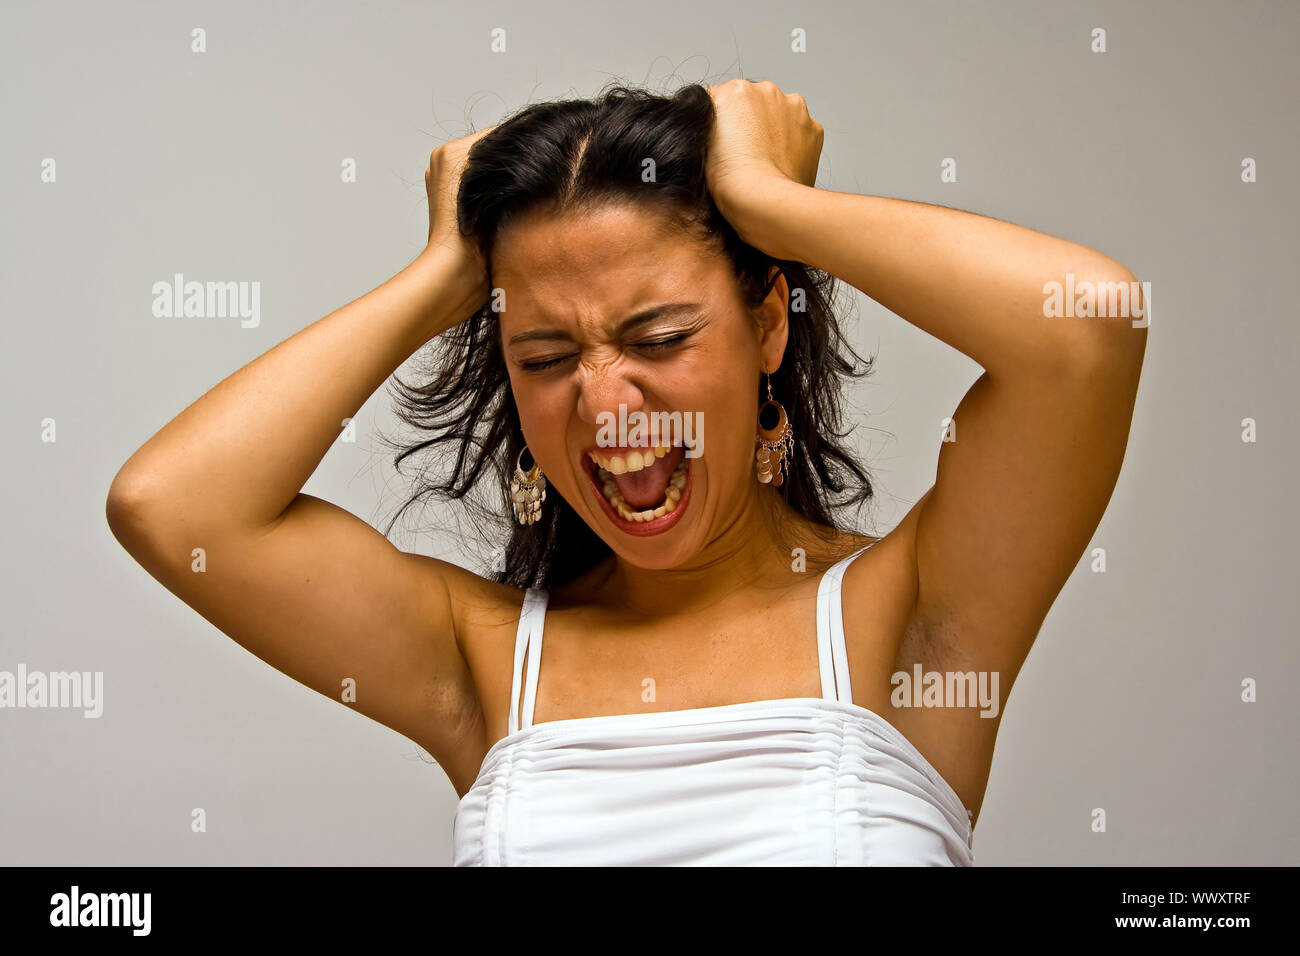 A Young Beautiful Latina Woman Screeming Of Frustration And Pulling Her Hair With Both Hands 